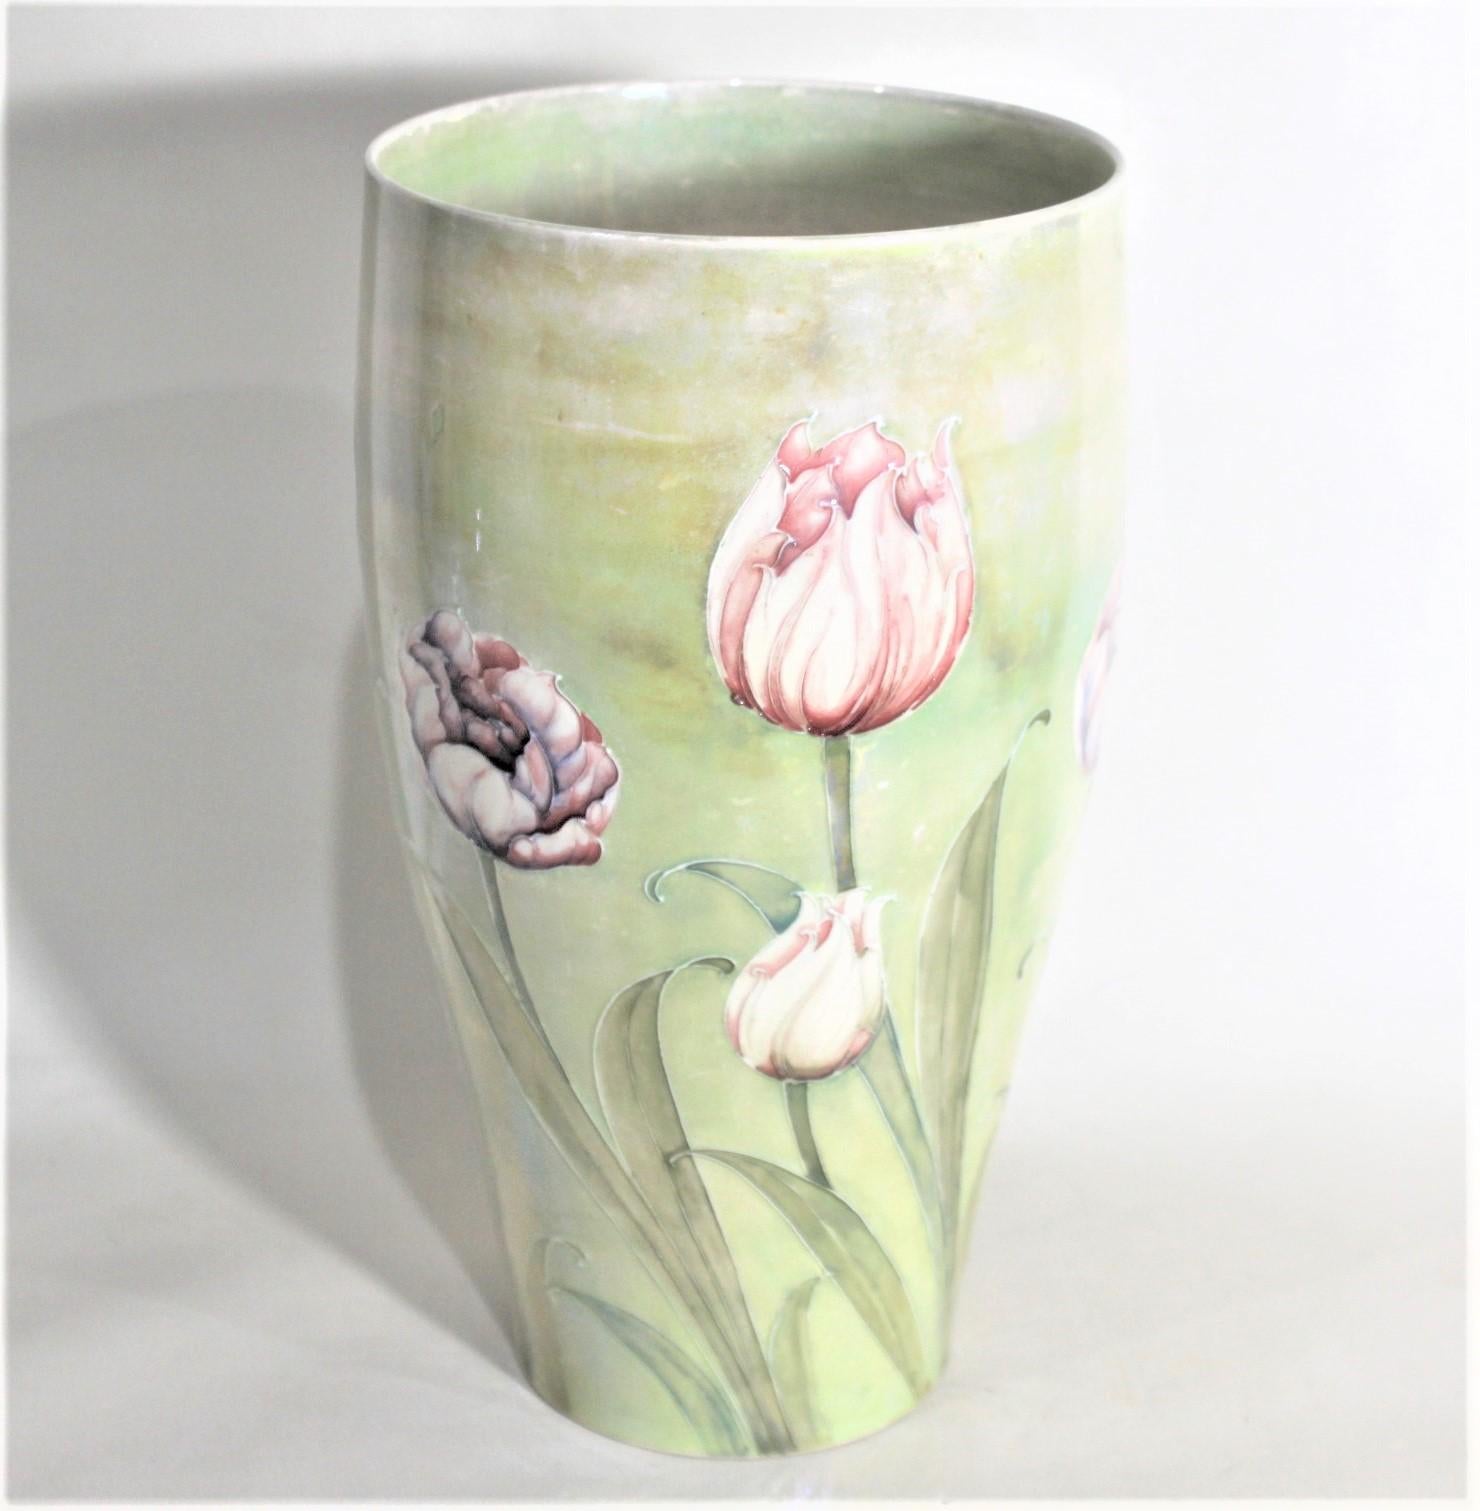 Antique William Moorcroft Art Pottery Tulip Patterned Vase with Lustre Glaze In Good Condition For Sale In Hamilton, Ontario